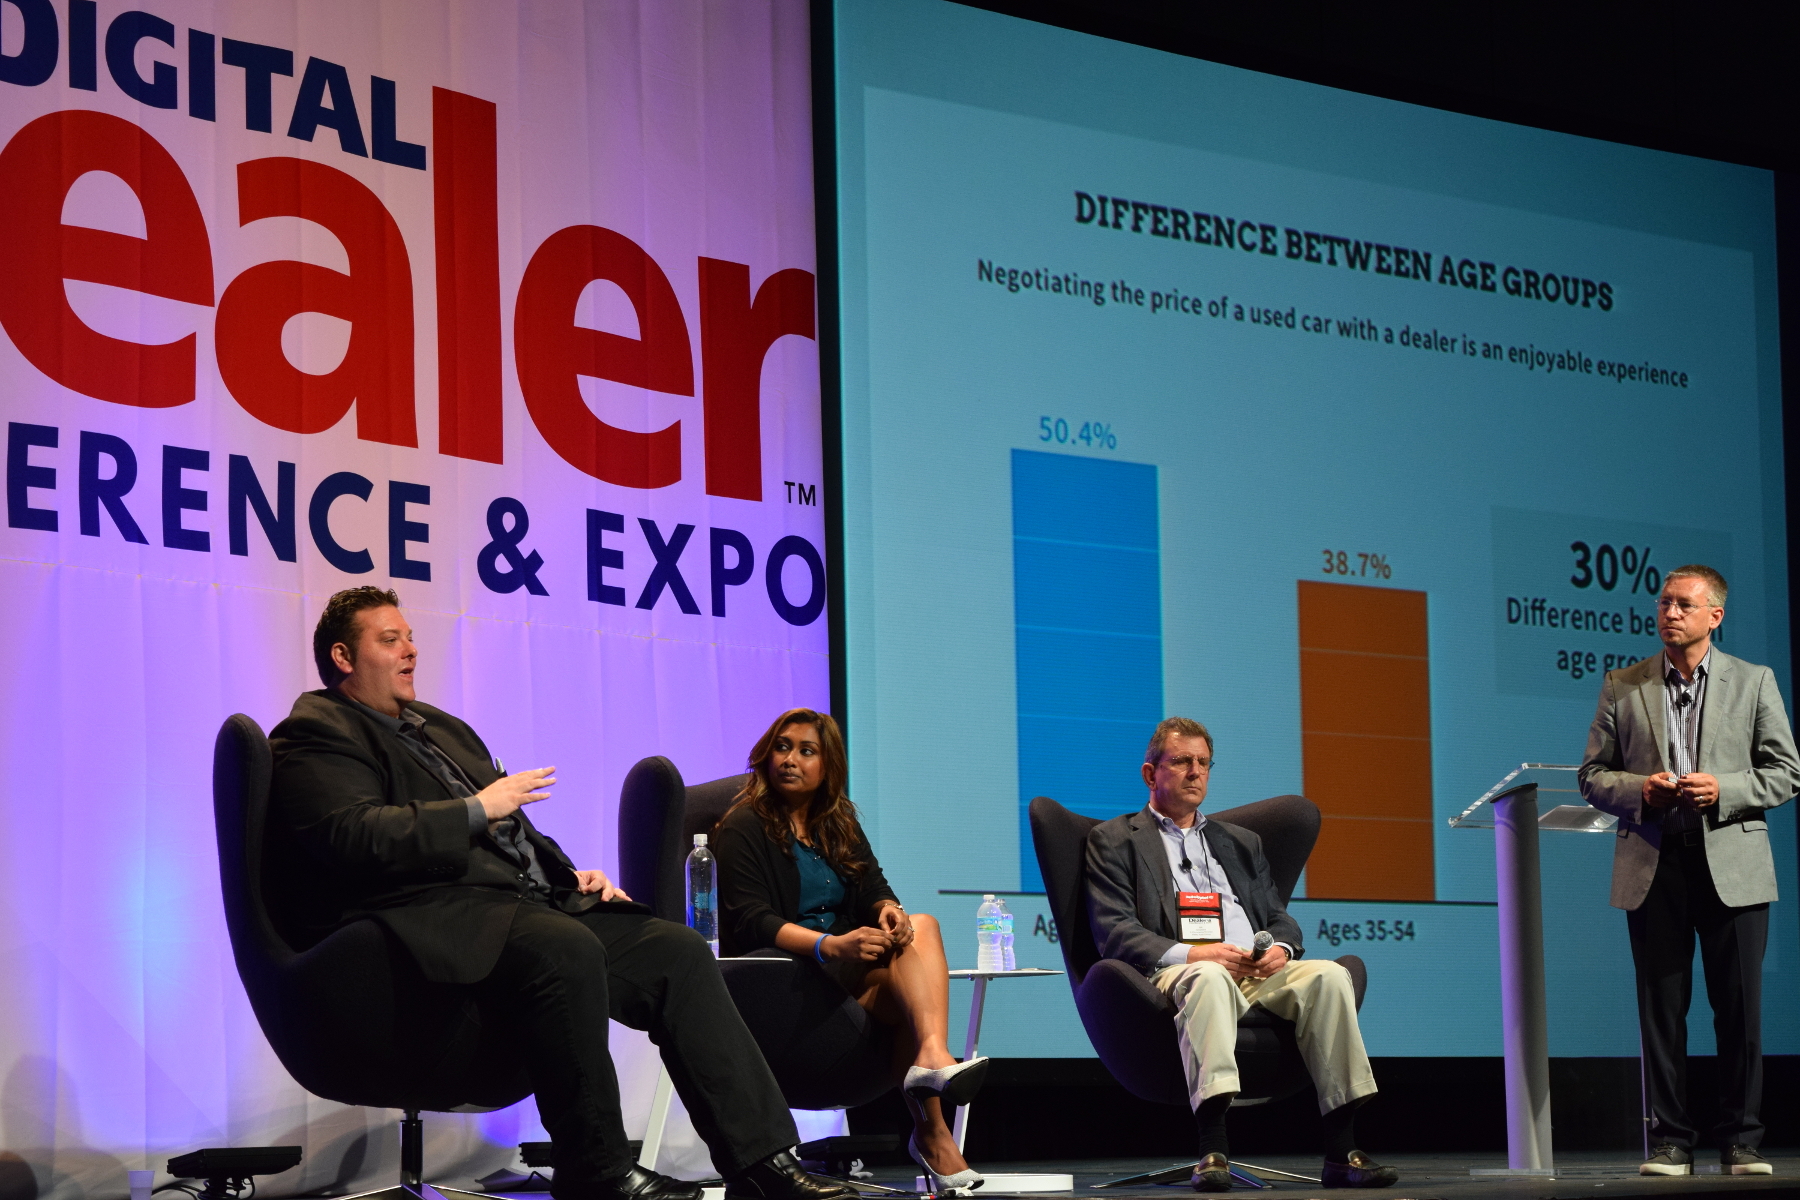 The Smashing Success of the 18th Digital Dealer Conference